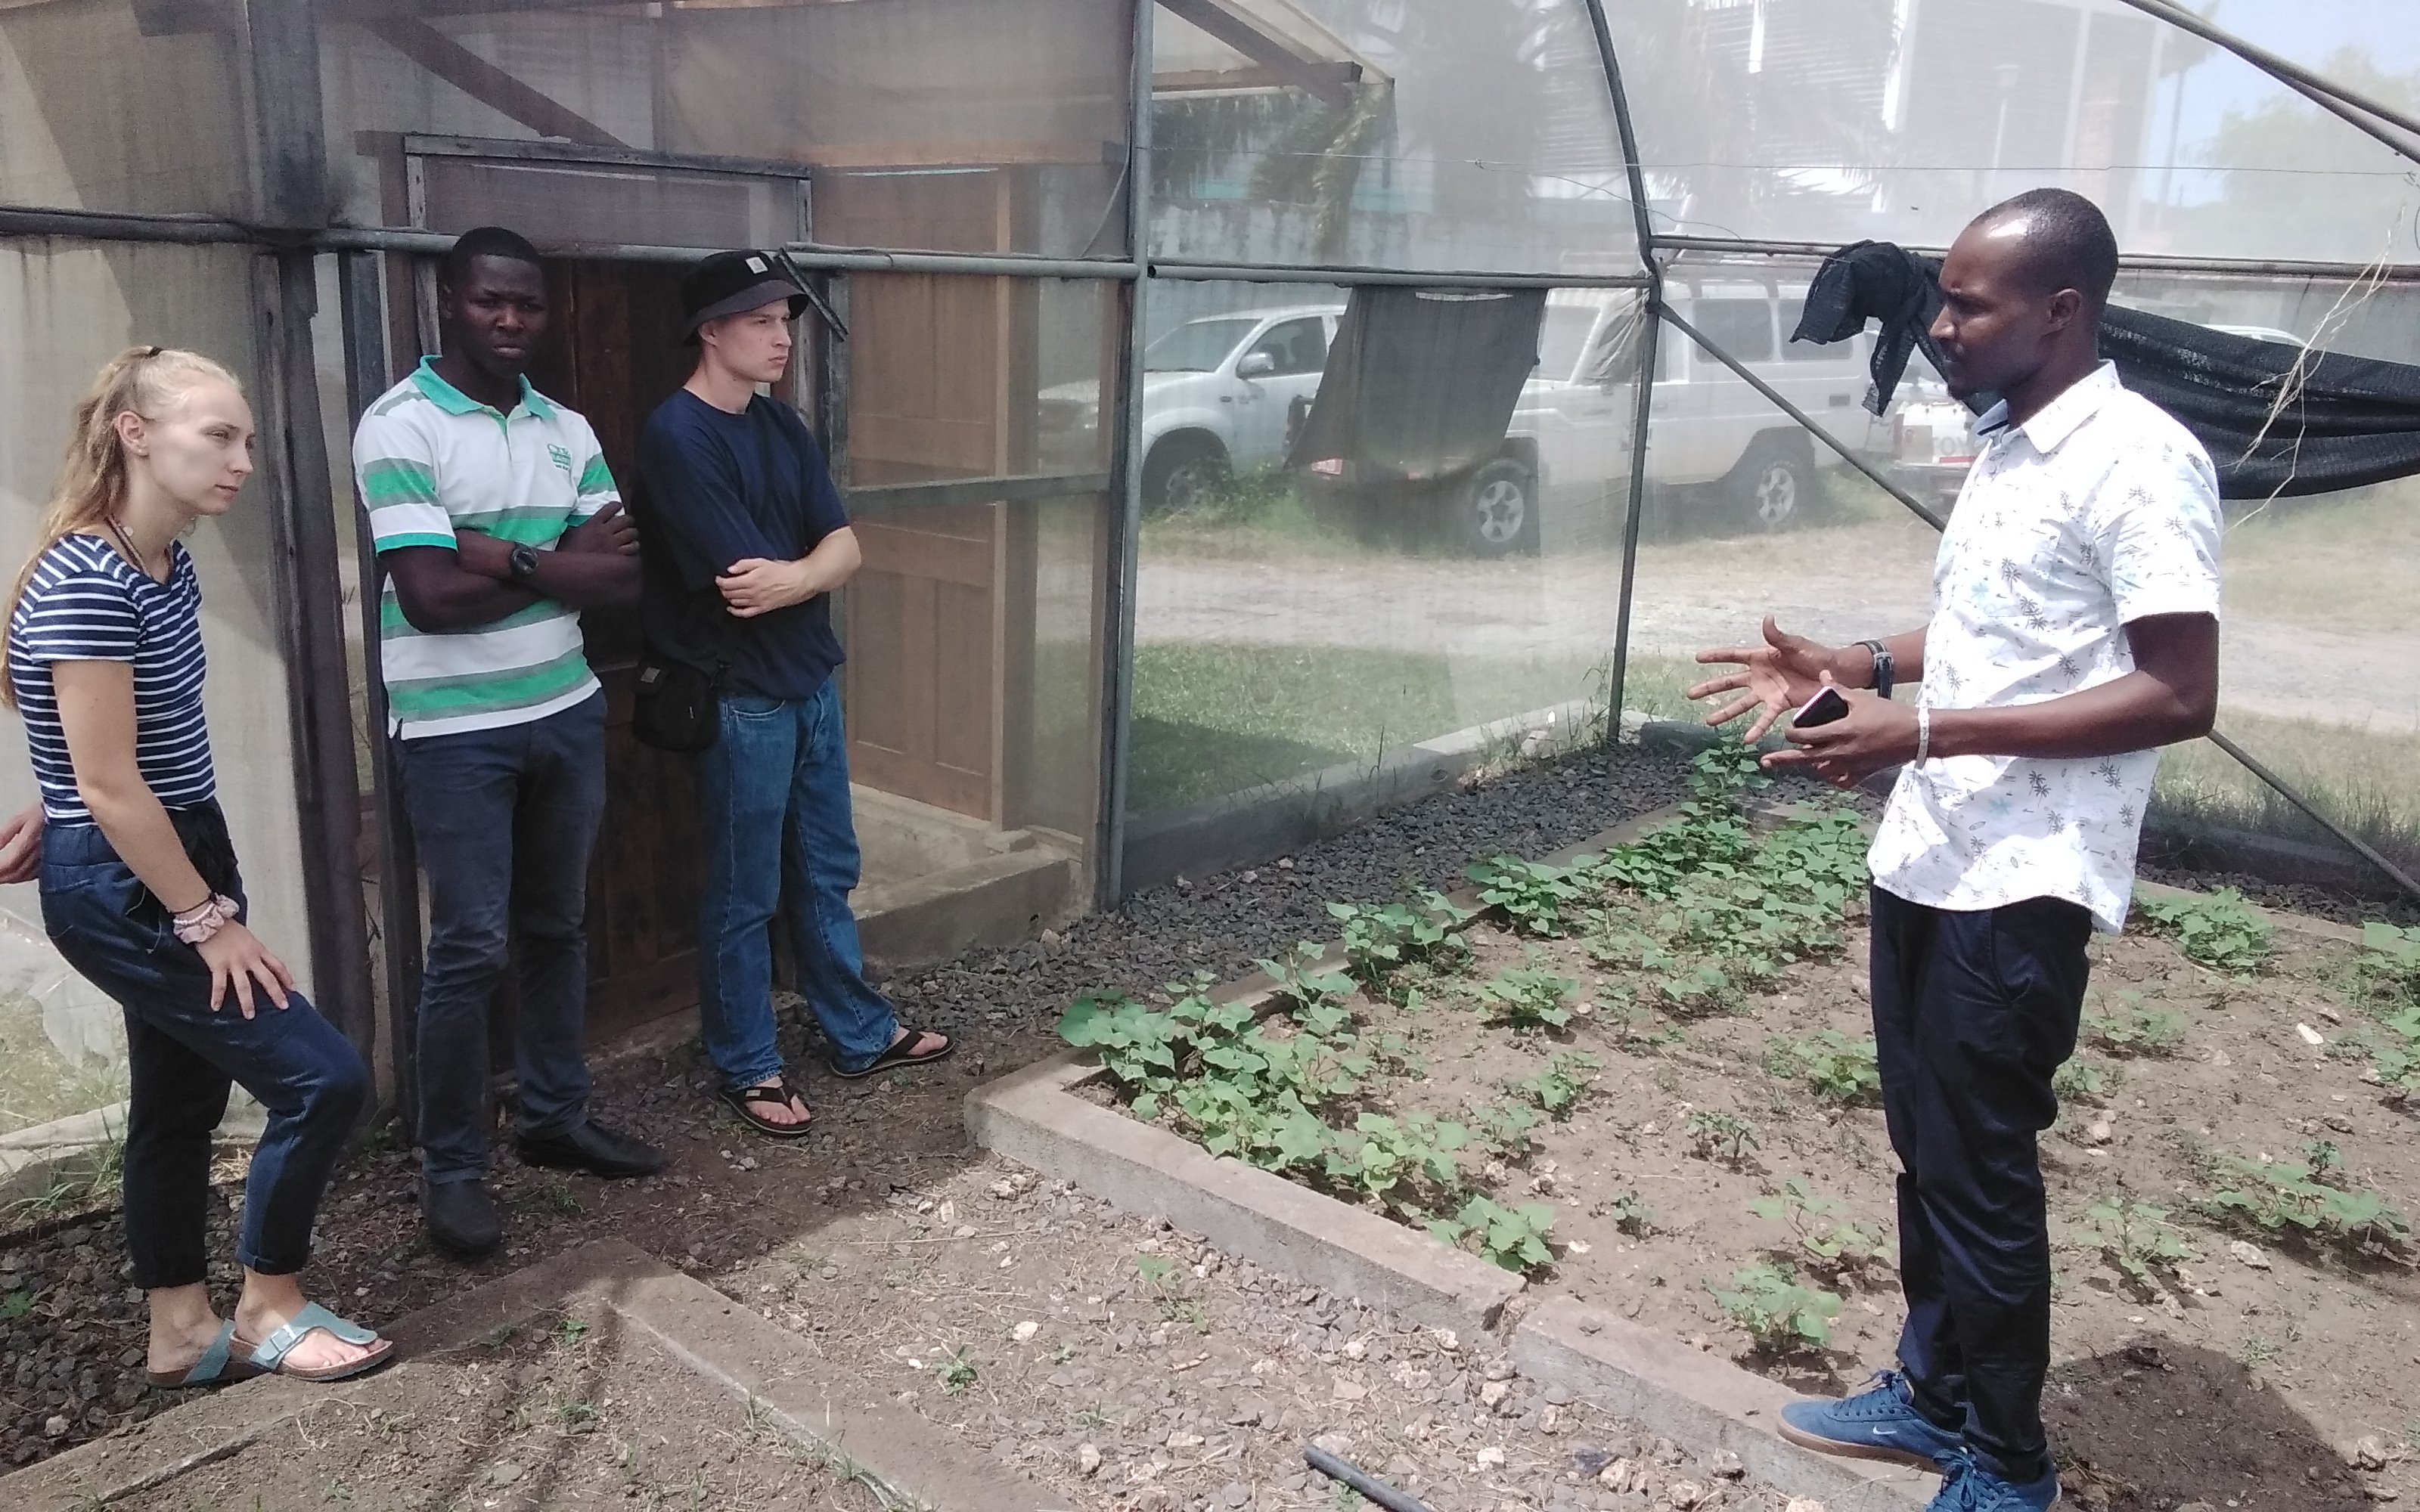 Mr. Emmanuel Haule (right), researcher from TARI Mikocheni gives explanations to guests from Germany on different activities that take place in the greenhouse available at TARI Mikocheni.